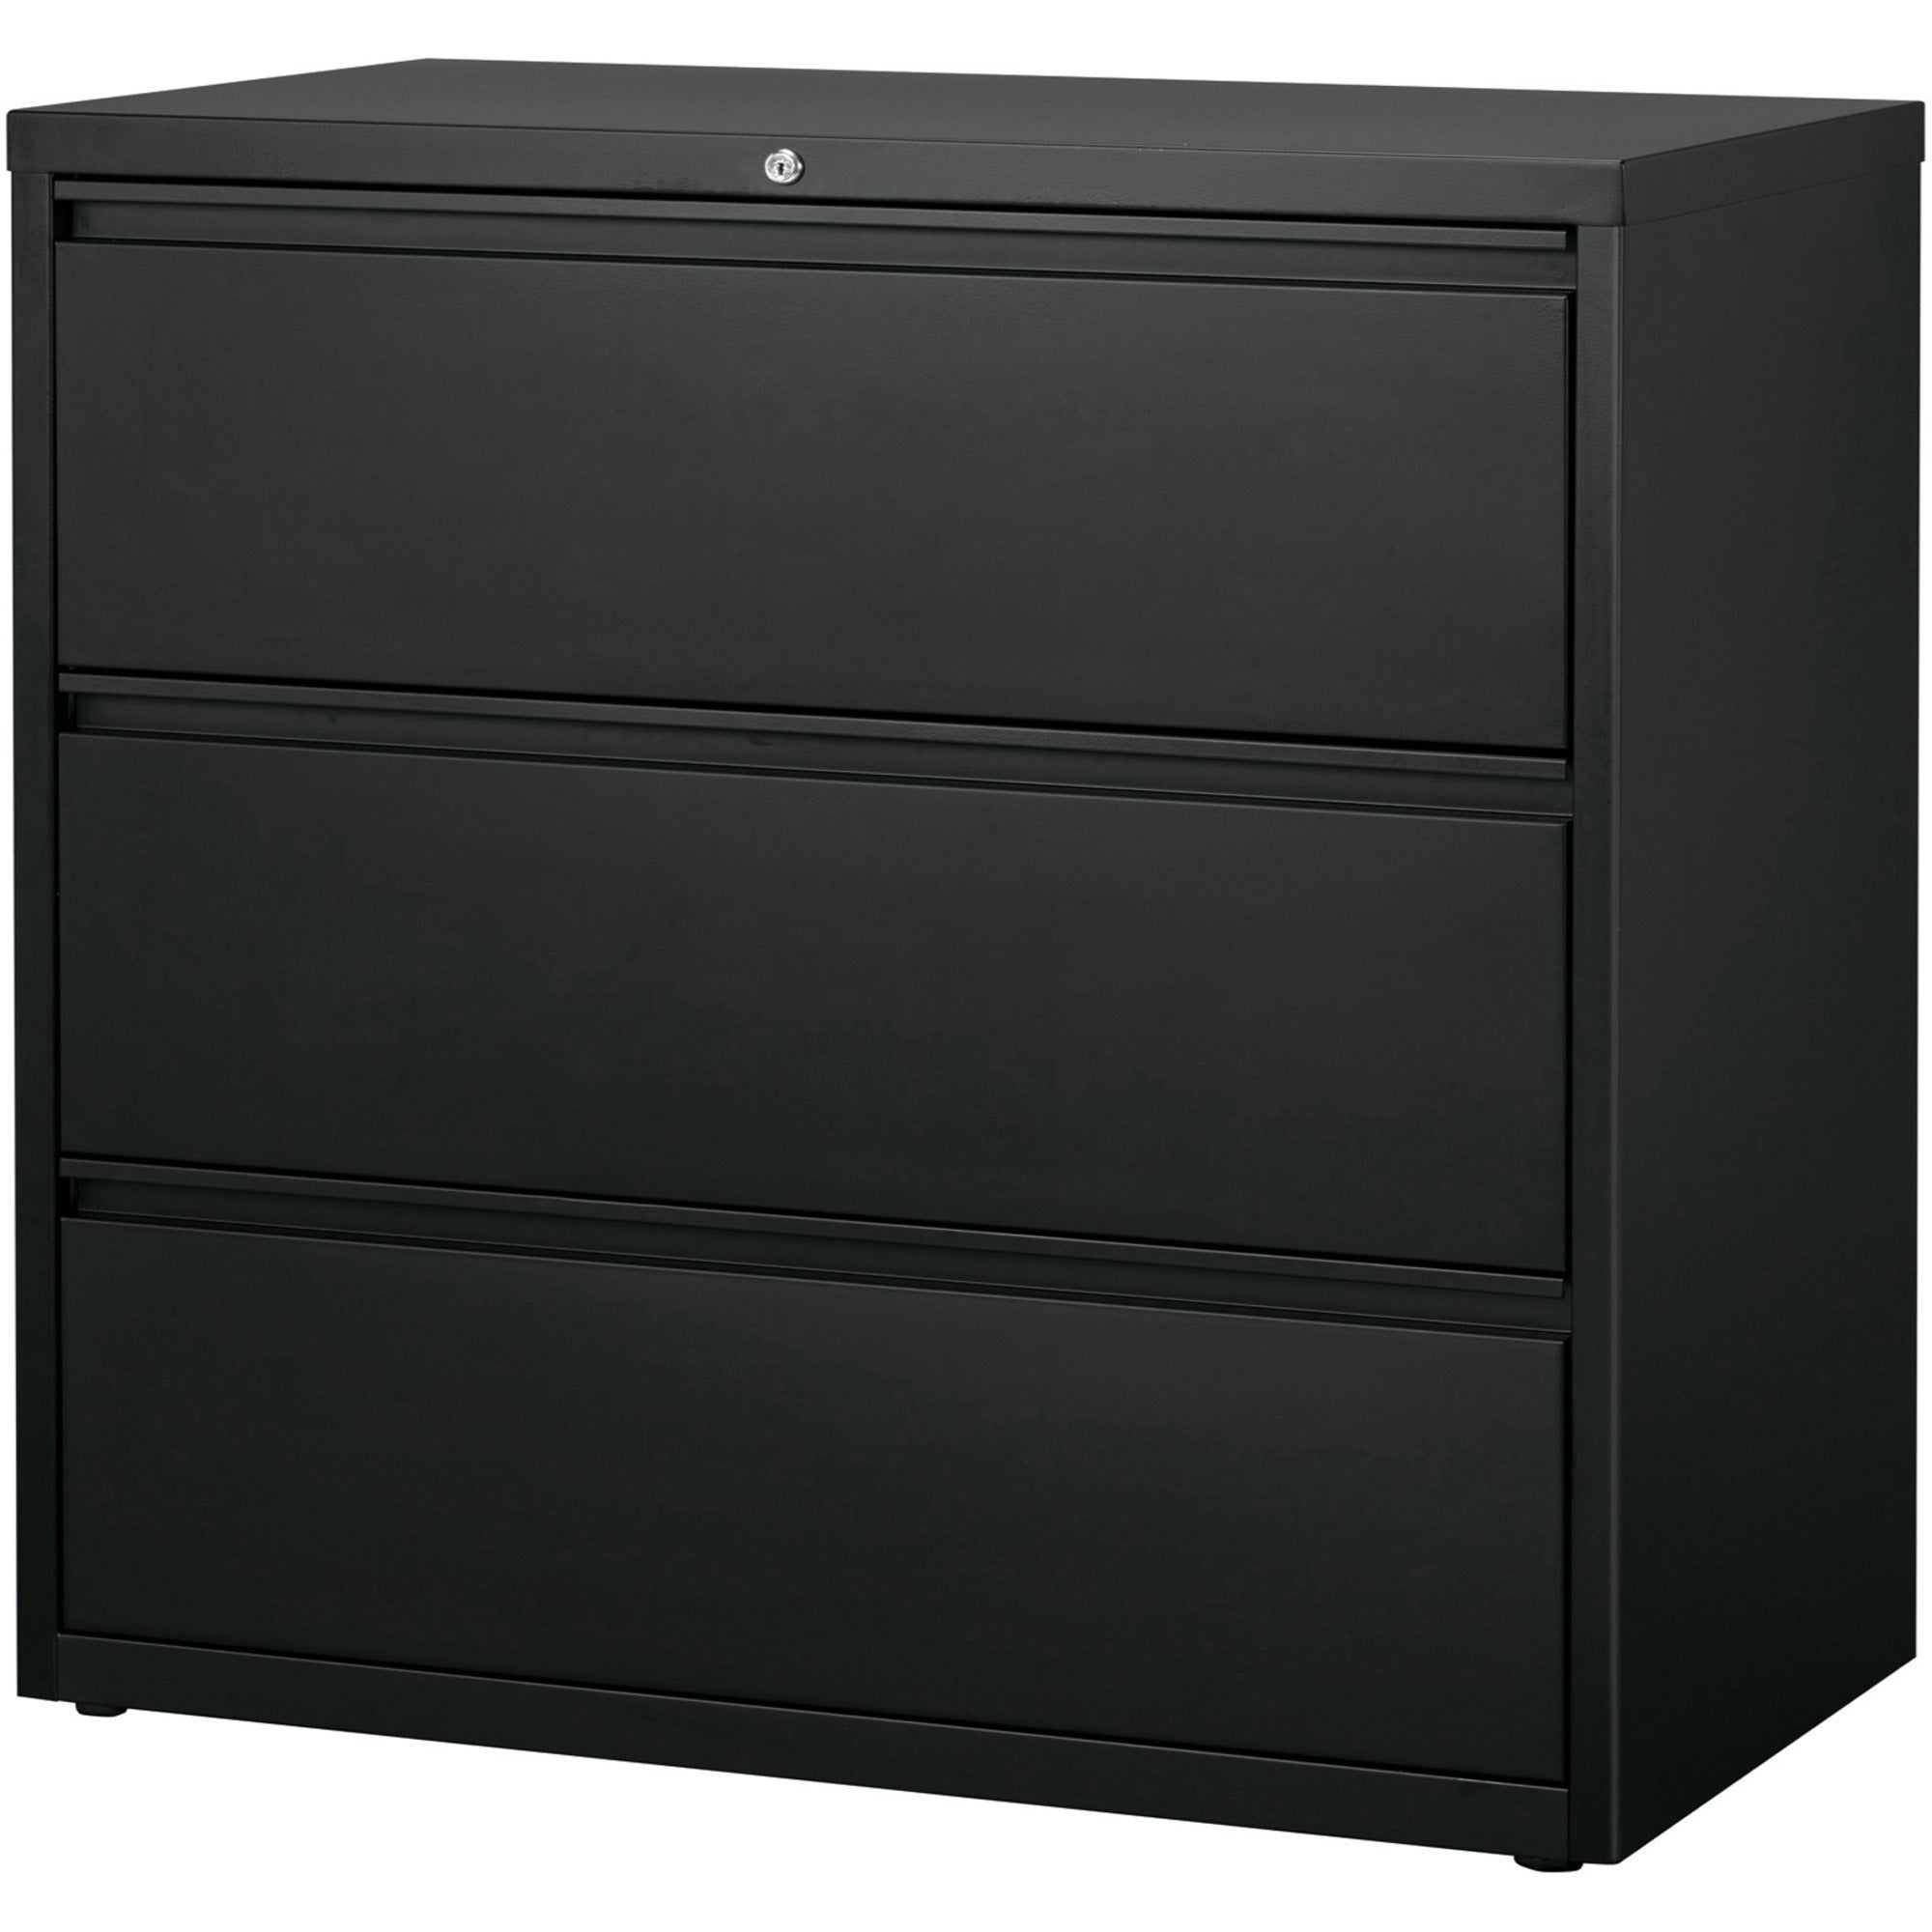 Lorell Fortress Series Lateral File - 42" x 18.8" x 40.1" - 3 x Drawer(s) for File - A4, Legal, Letter - Lateral - Anti-tip, Security Lock, Ball Bearing Slide, Reinforced Base, Leveling Glide, Interlocking, Hanging Rail, Magnetic Label Holder - Charc - 